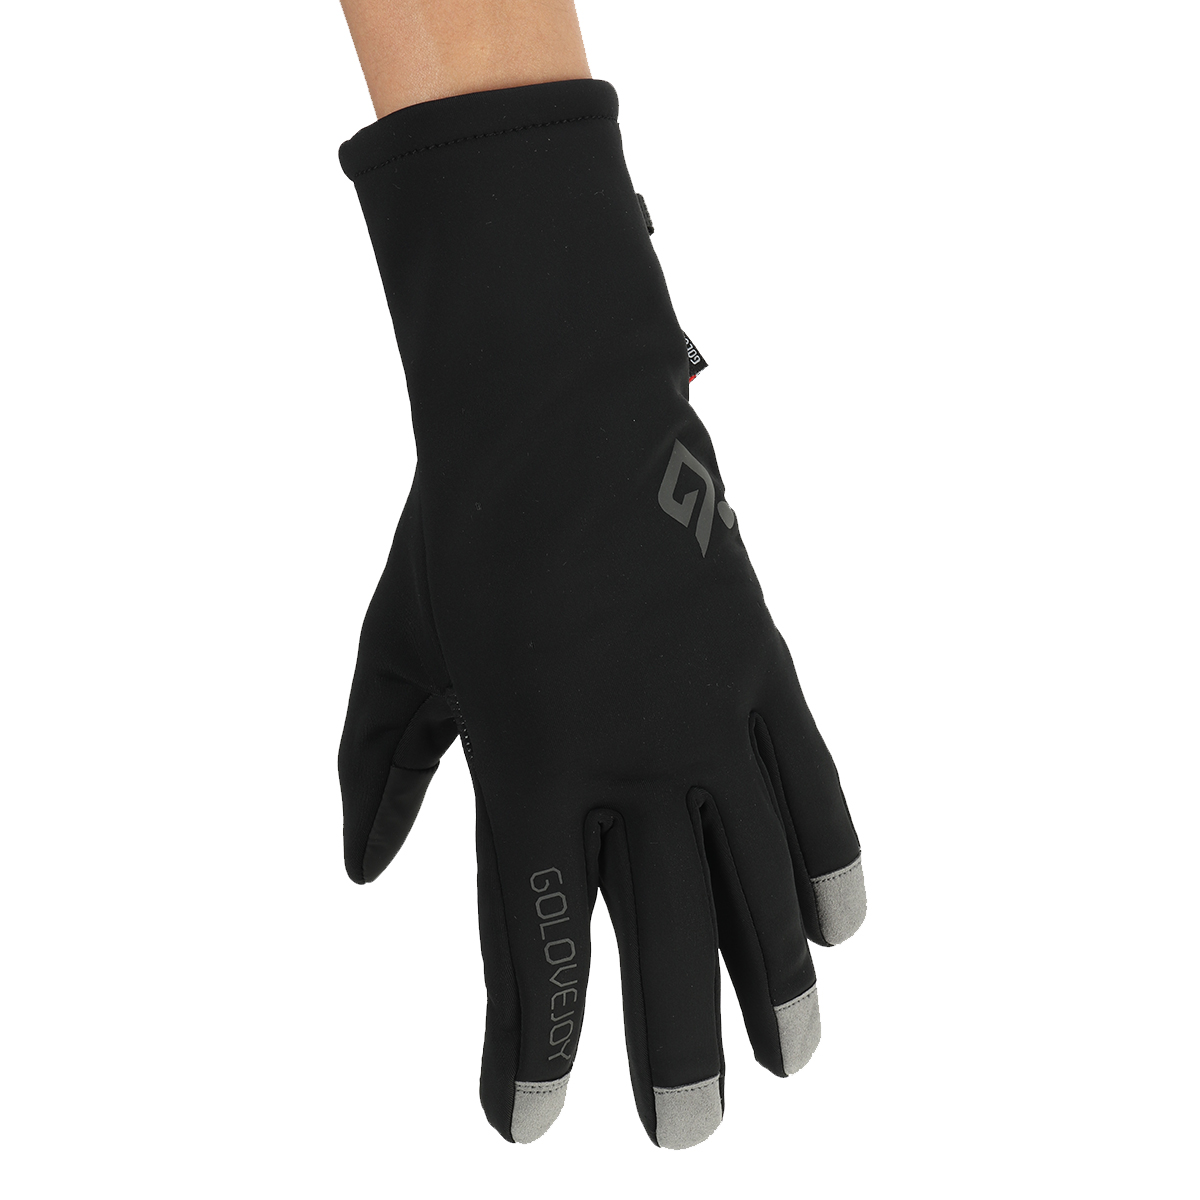 Winter-Warm-Touch-Screen-Thermal-Gloves-Ski-Snow-Snowboard-Cycling-Waterproof-Winter-Gloves-1921886-6